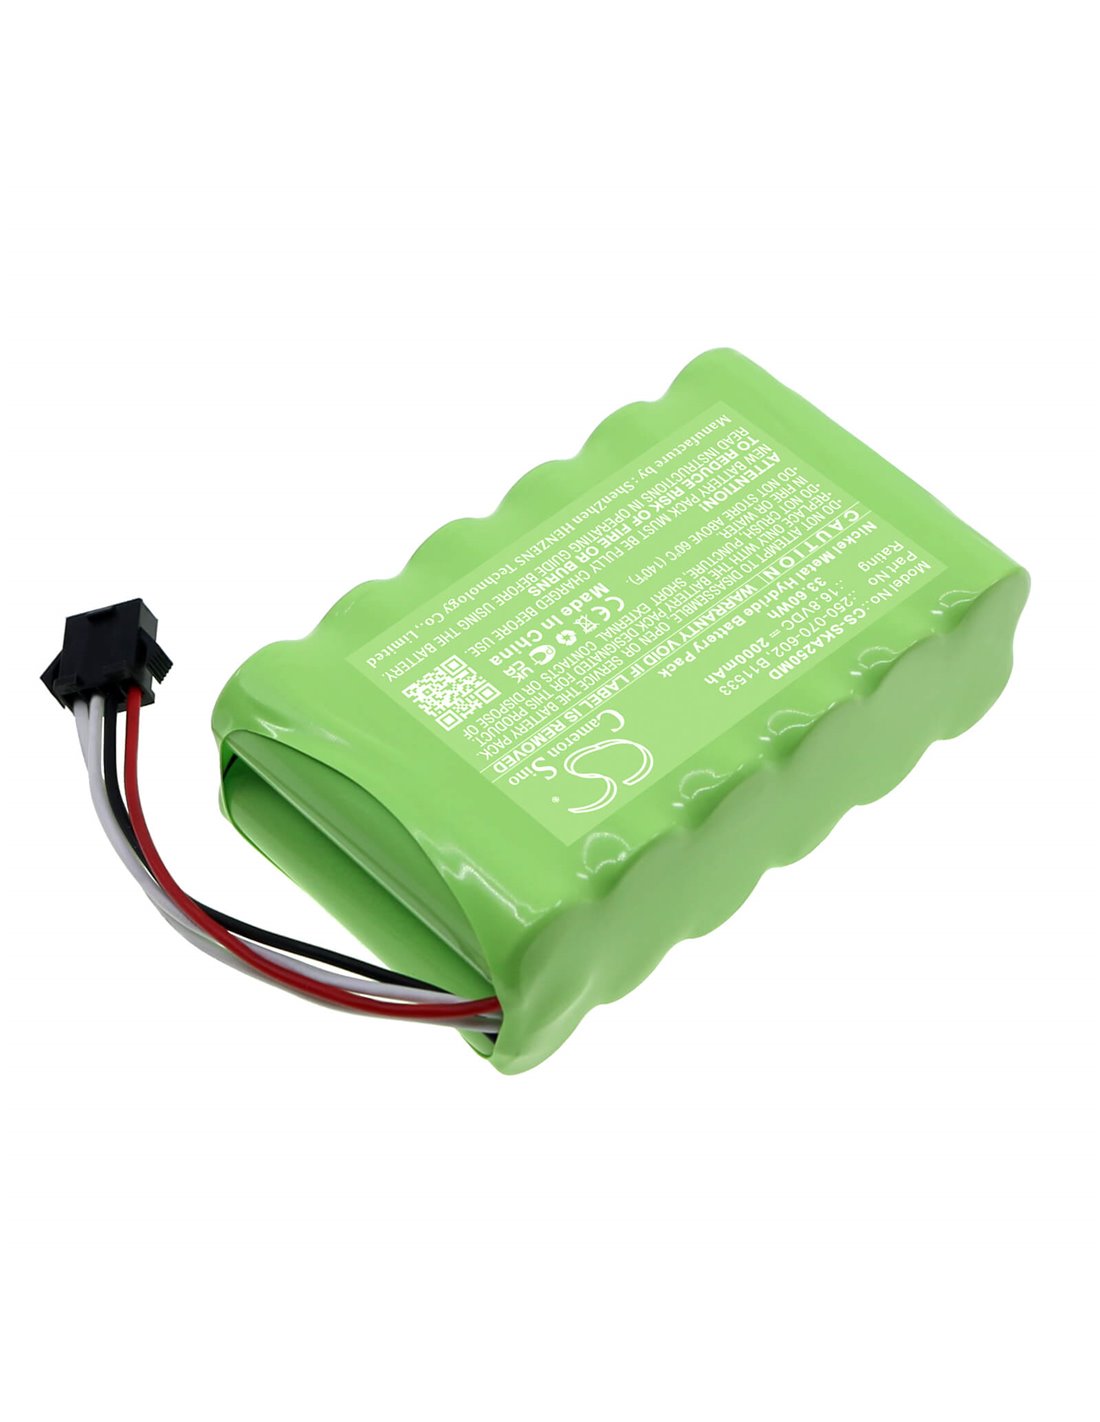 14.4V, Ni-MH, 2000mAh, Battery fits Zede, Single Micro Injection Pump, ZD-50C6, 28.80Wh